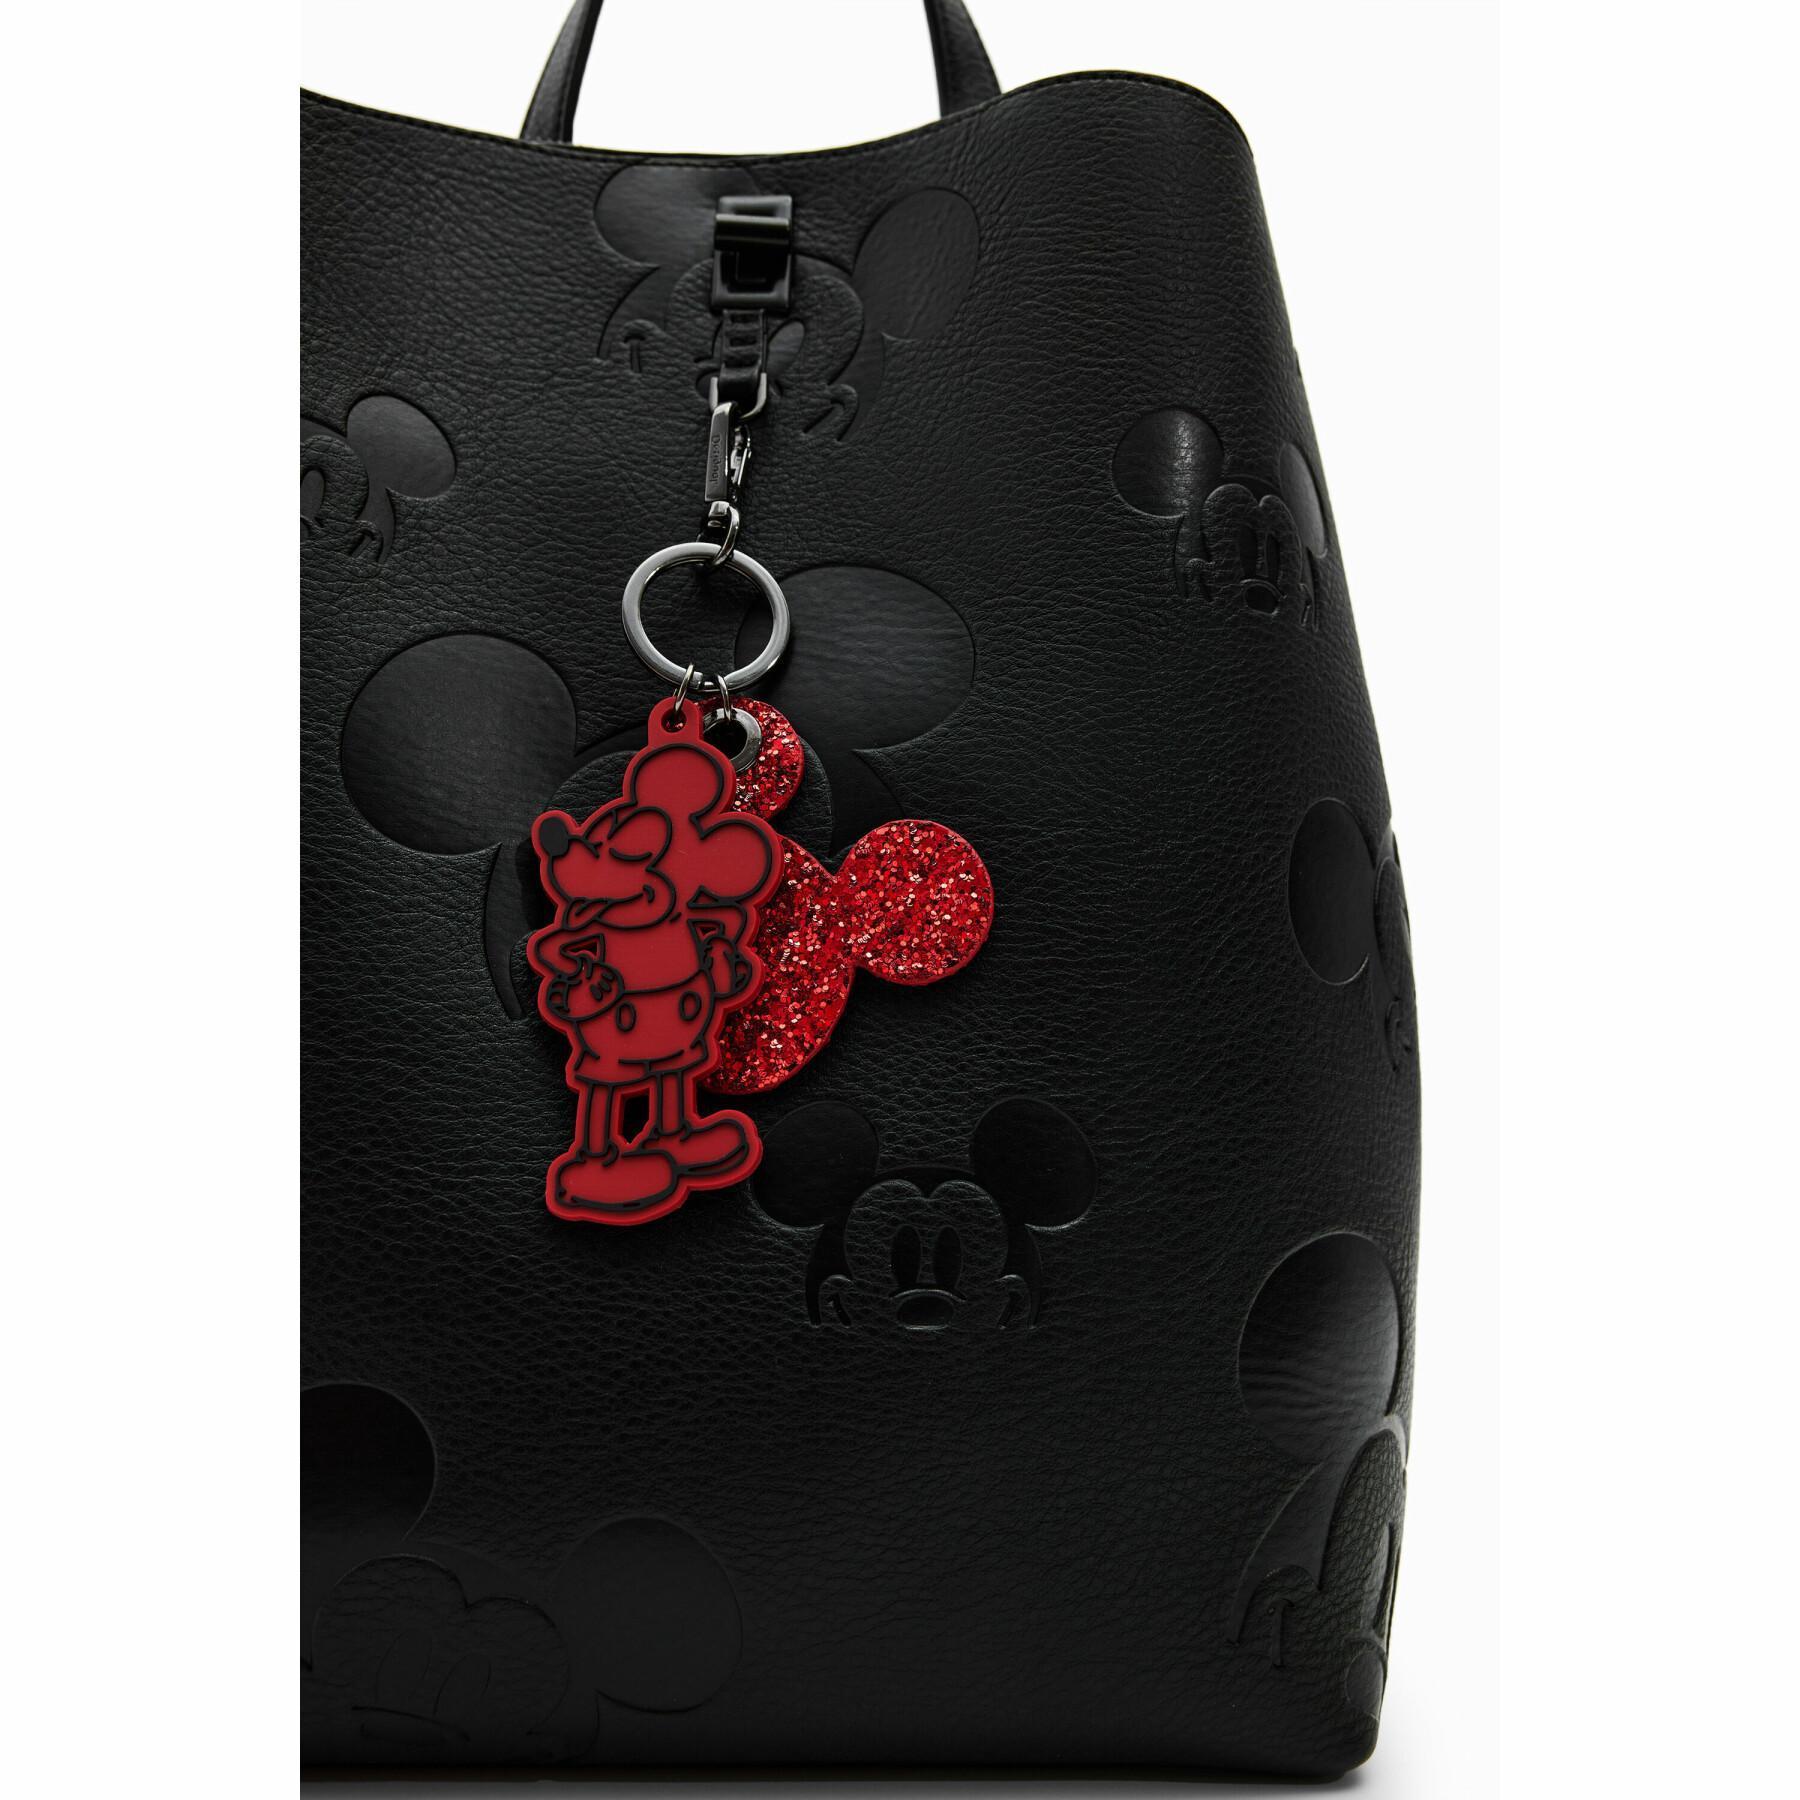 Women's backpack Desigual All Mickey Sumy